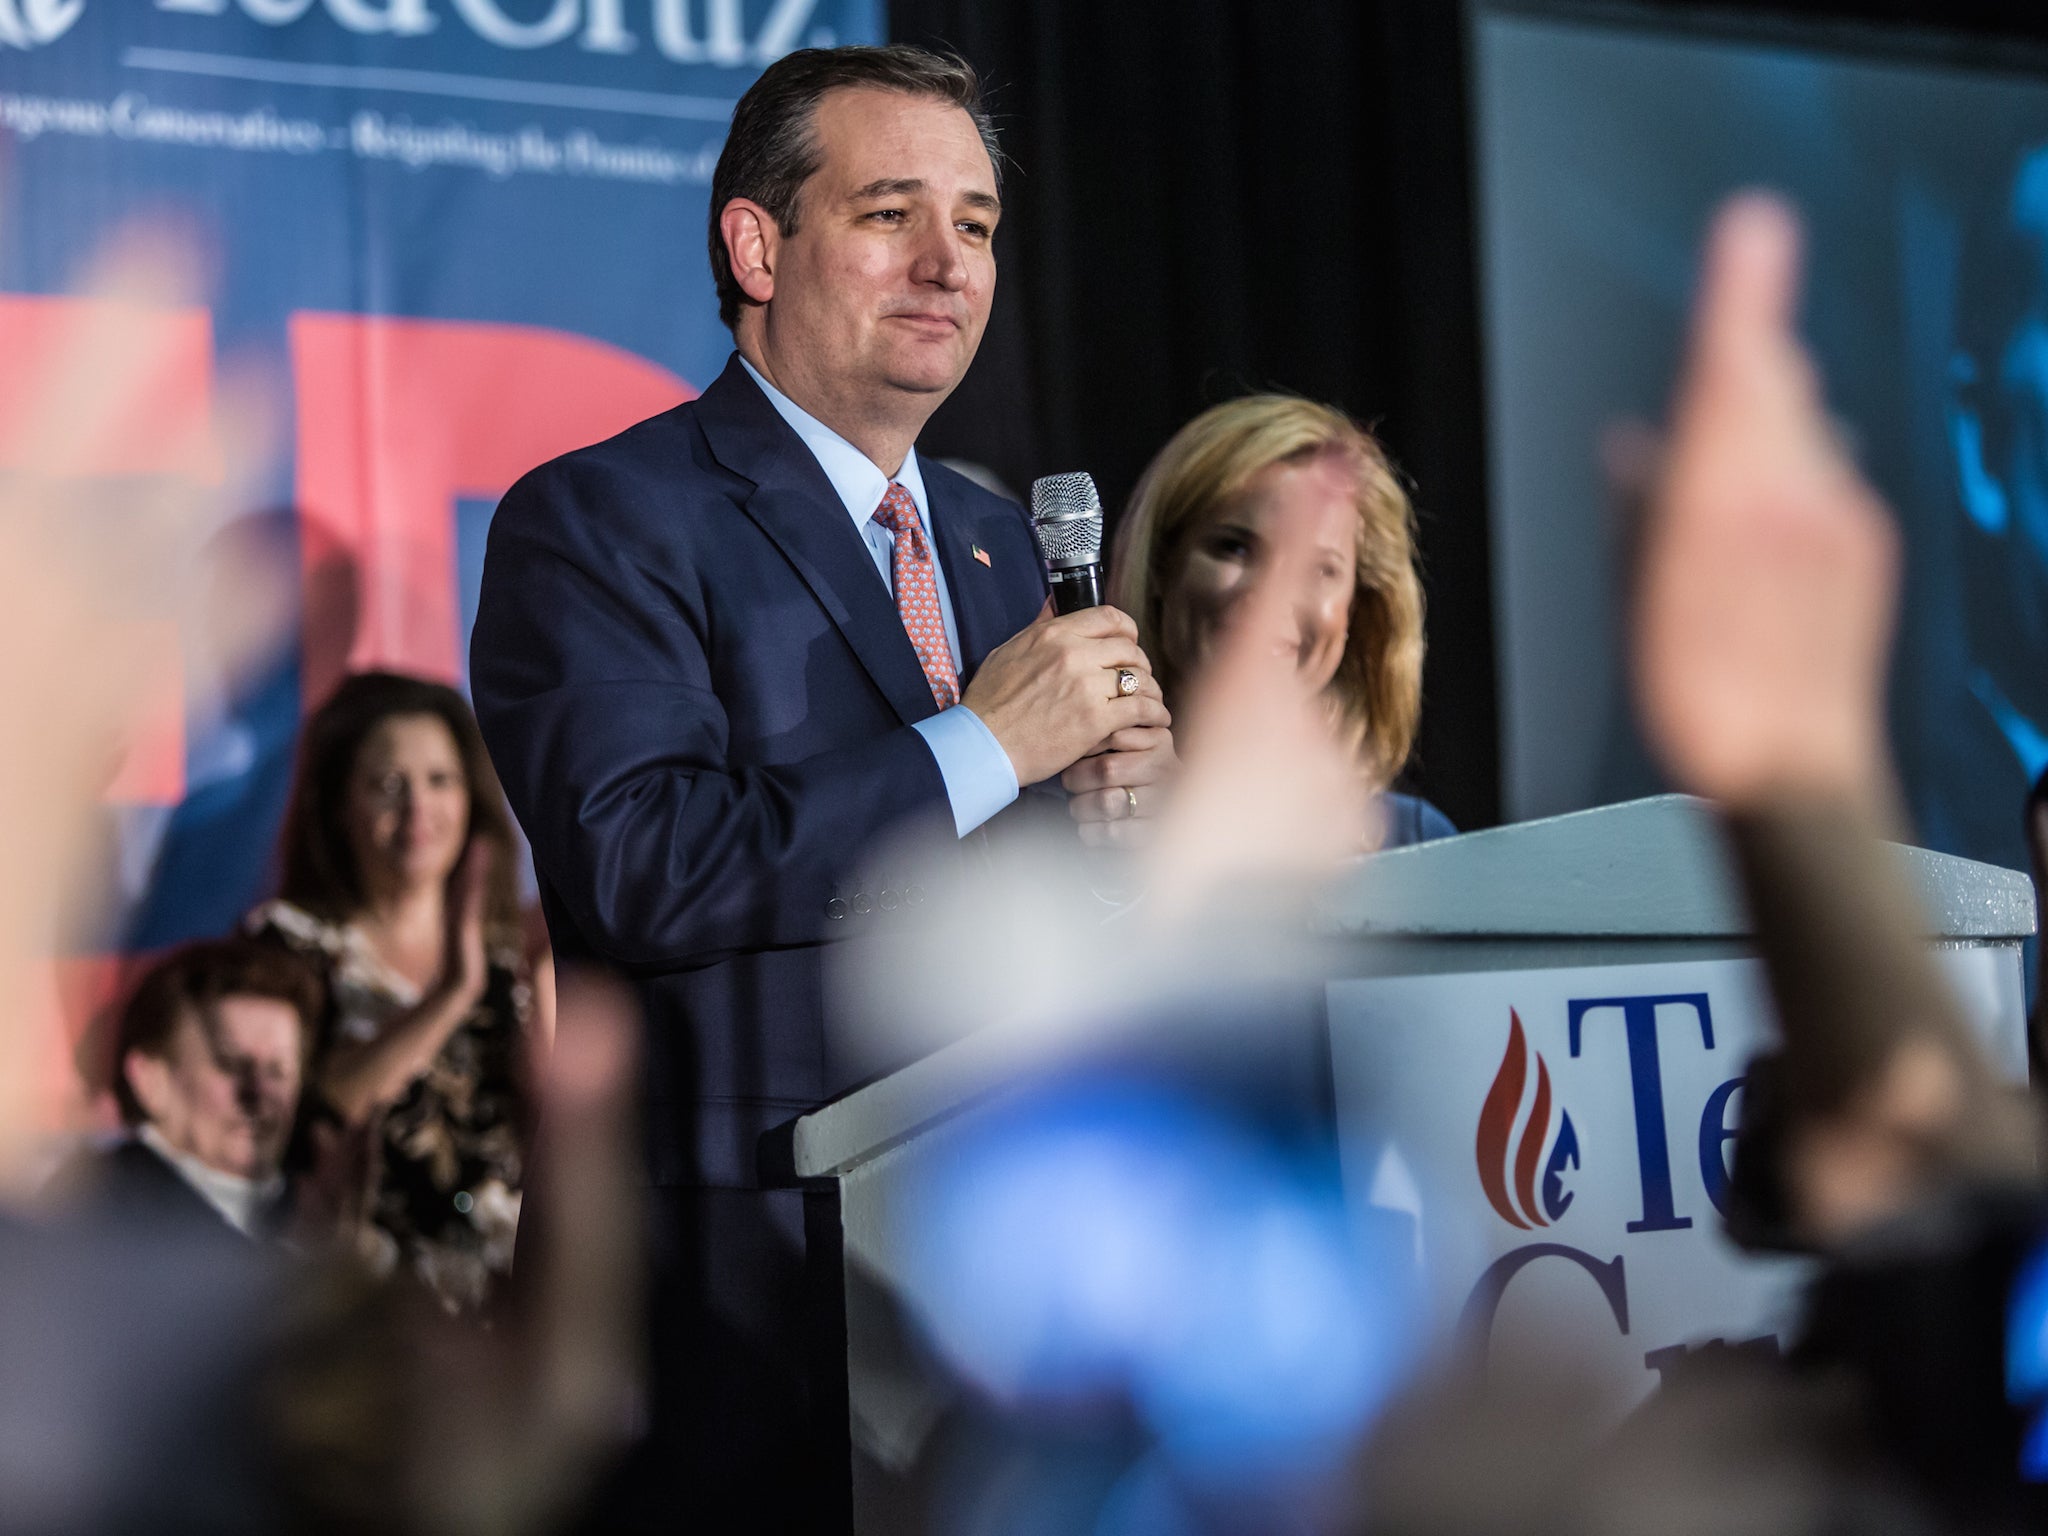 Ted Cruz comfortably won the Iowa Caucus on Monday, but history shows that past Iowa winners rarely go on to win the presidency.